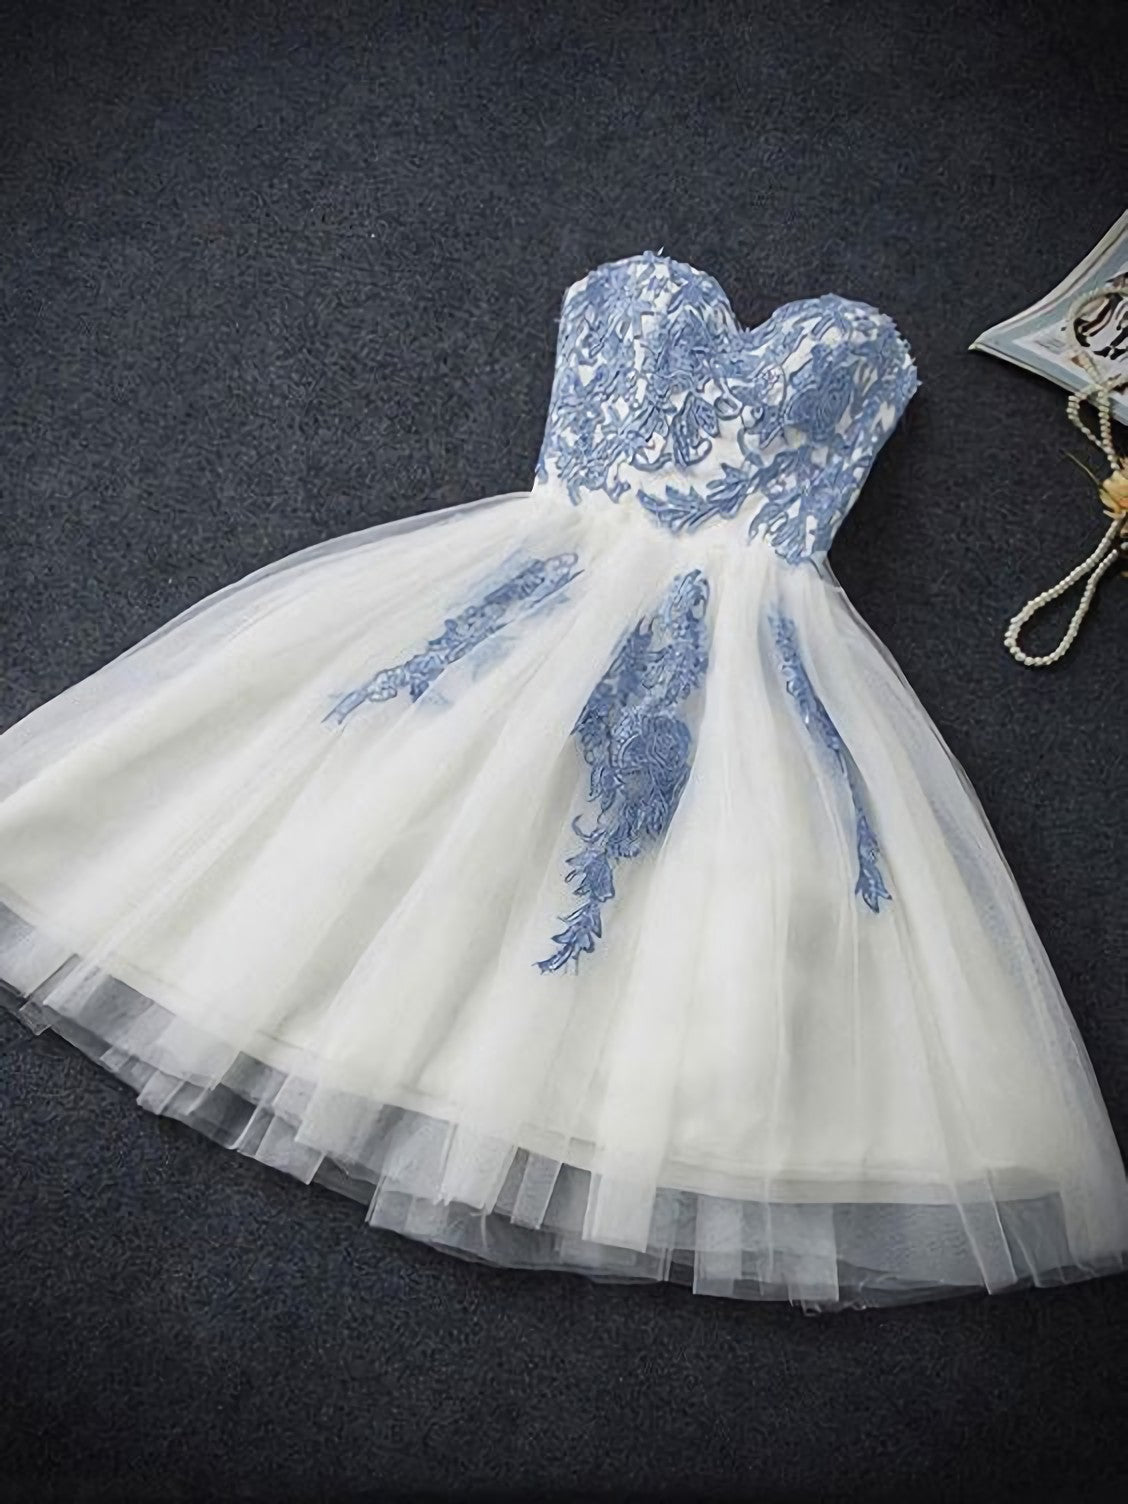 Prom Dresses Tulle, A Line Strapless Cute Sweetheart Short Ivory Hoco Short Prom Dresses